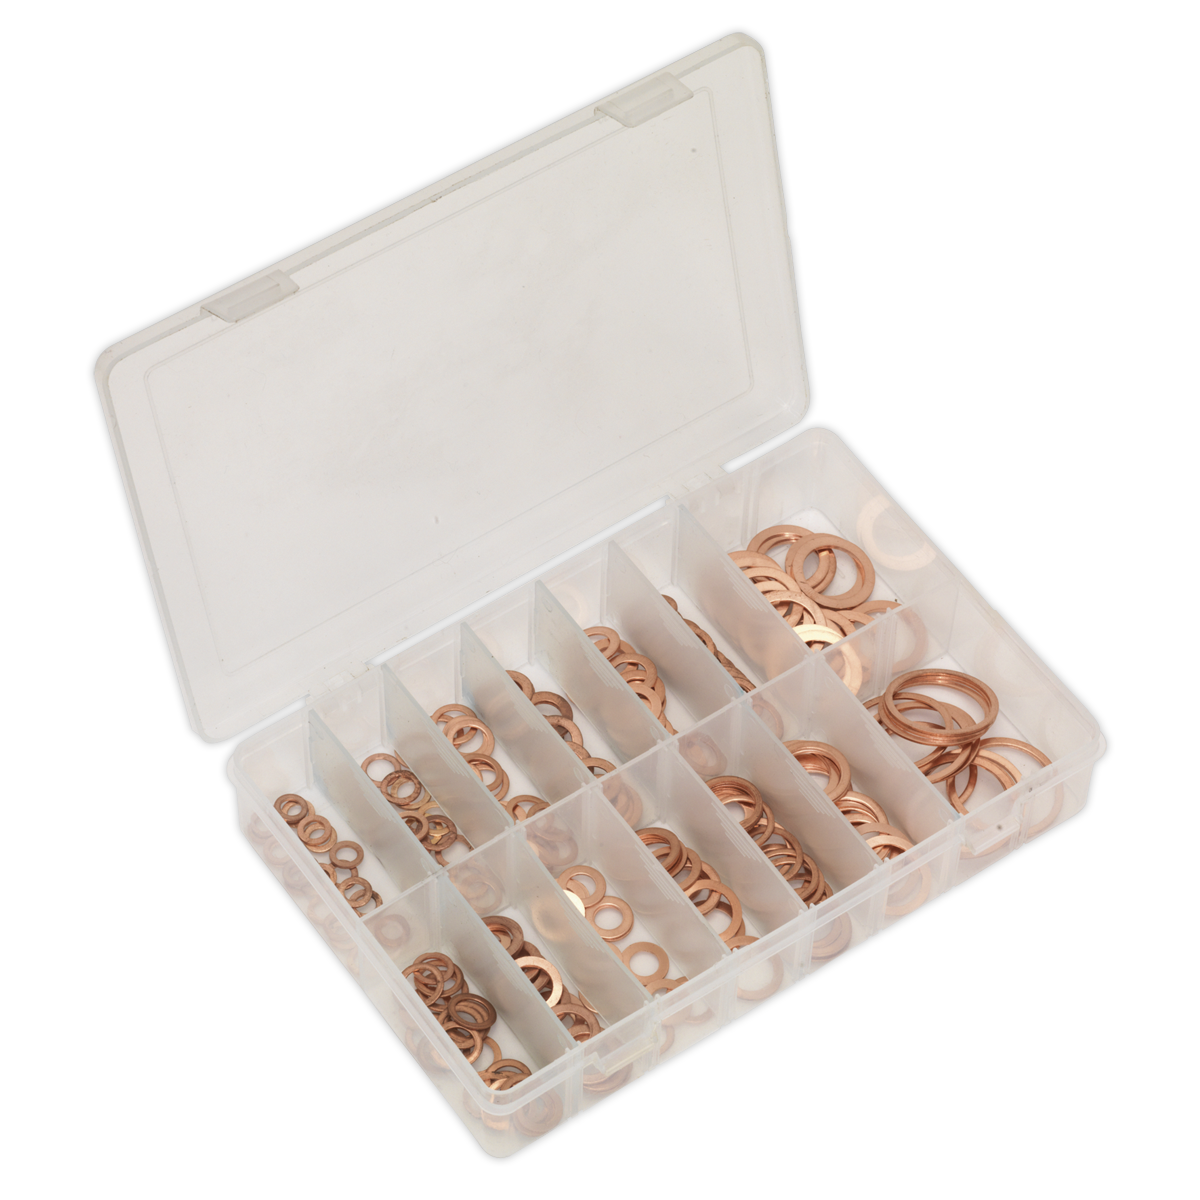 Copper Sealing Washer Assortment 250pc - Metric